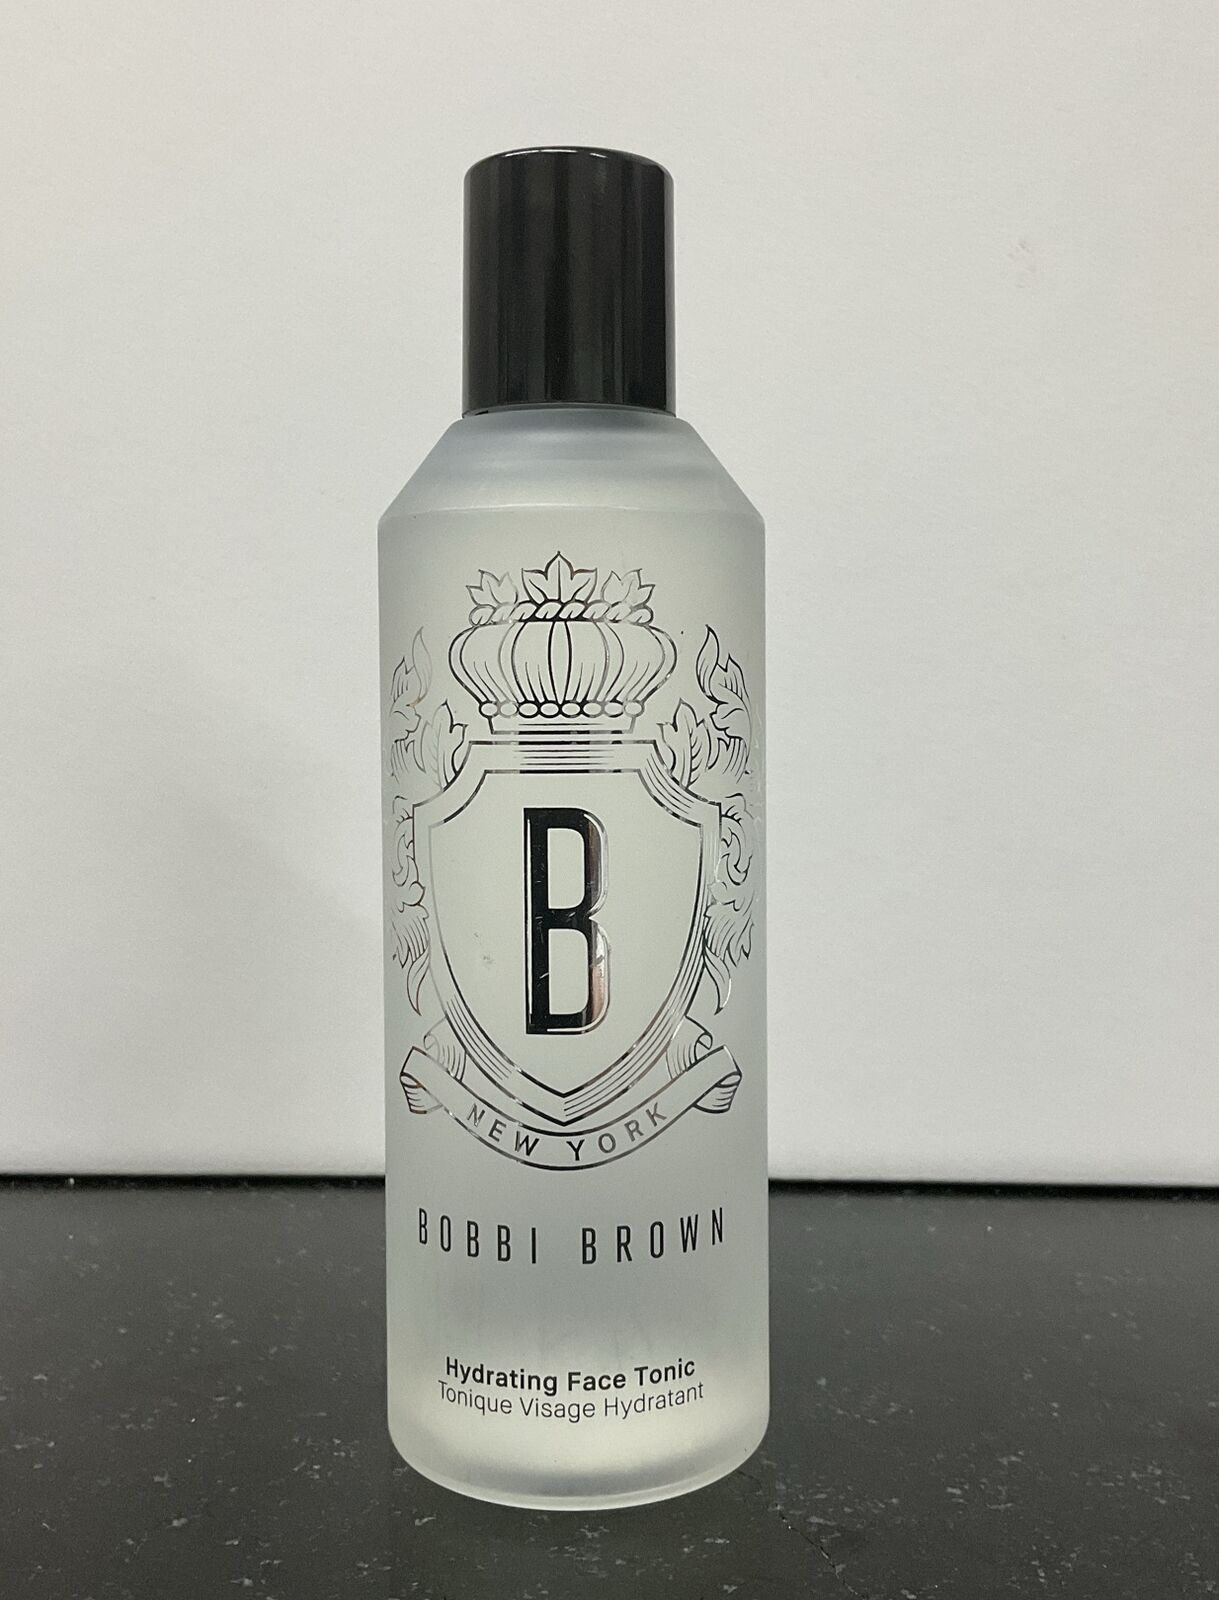 Bobbi Brown Hydrating Face Tonic  6.7 Oz Full Size CONDITION AS PICTURED